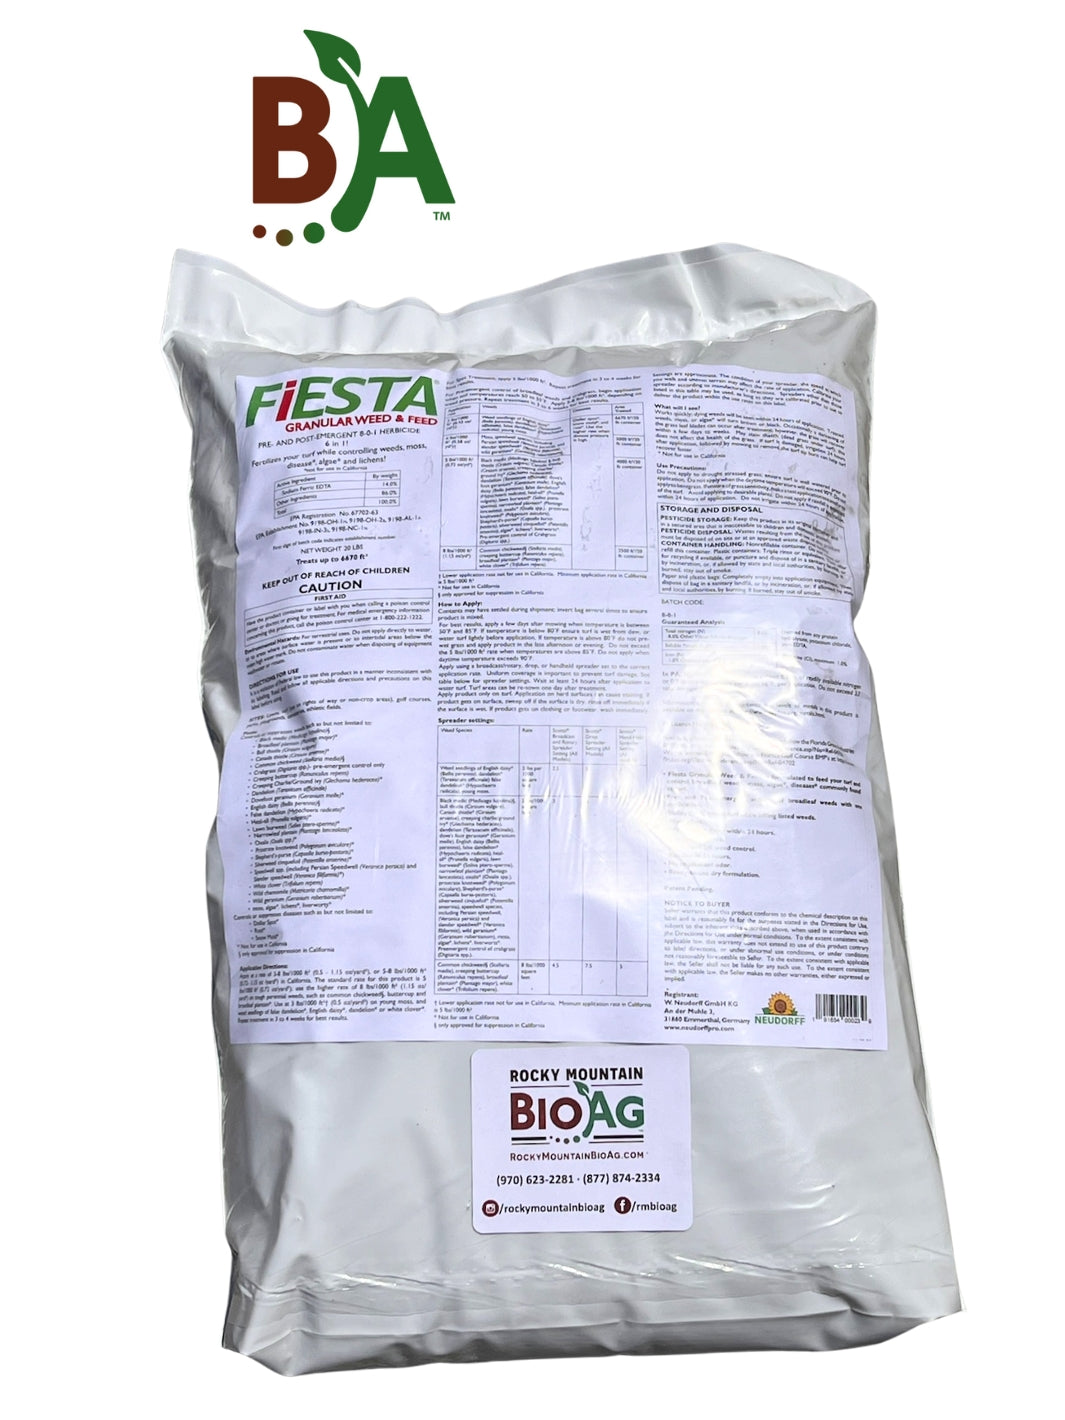 Picture of a 20 pound bag of Fiesta Granular Weed and Feed 8 0 1